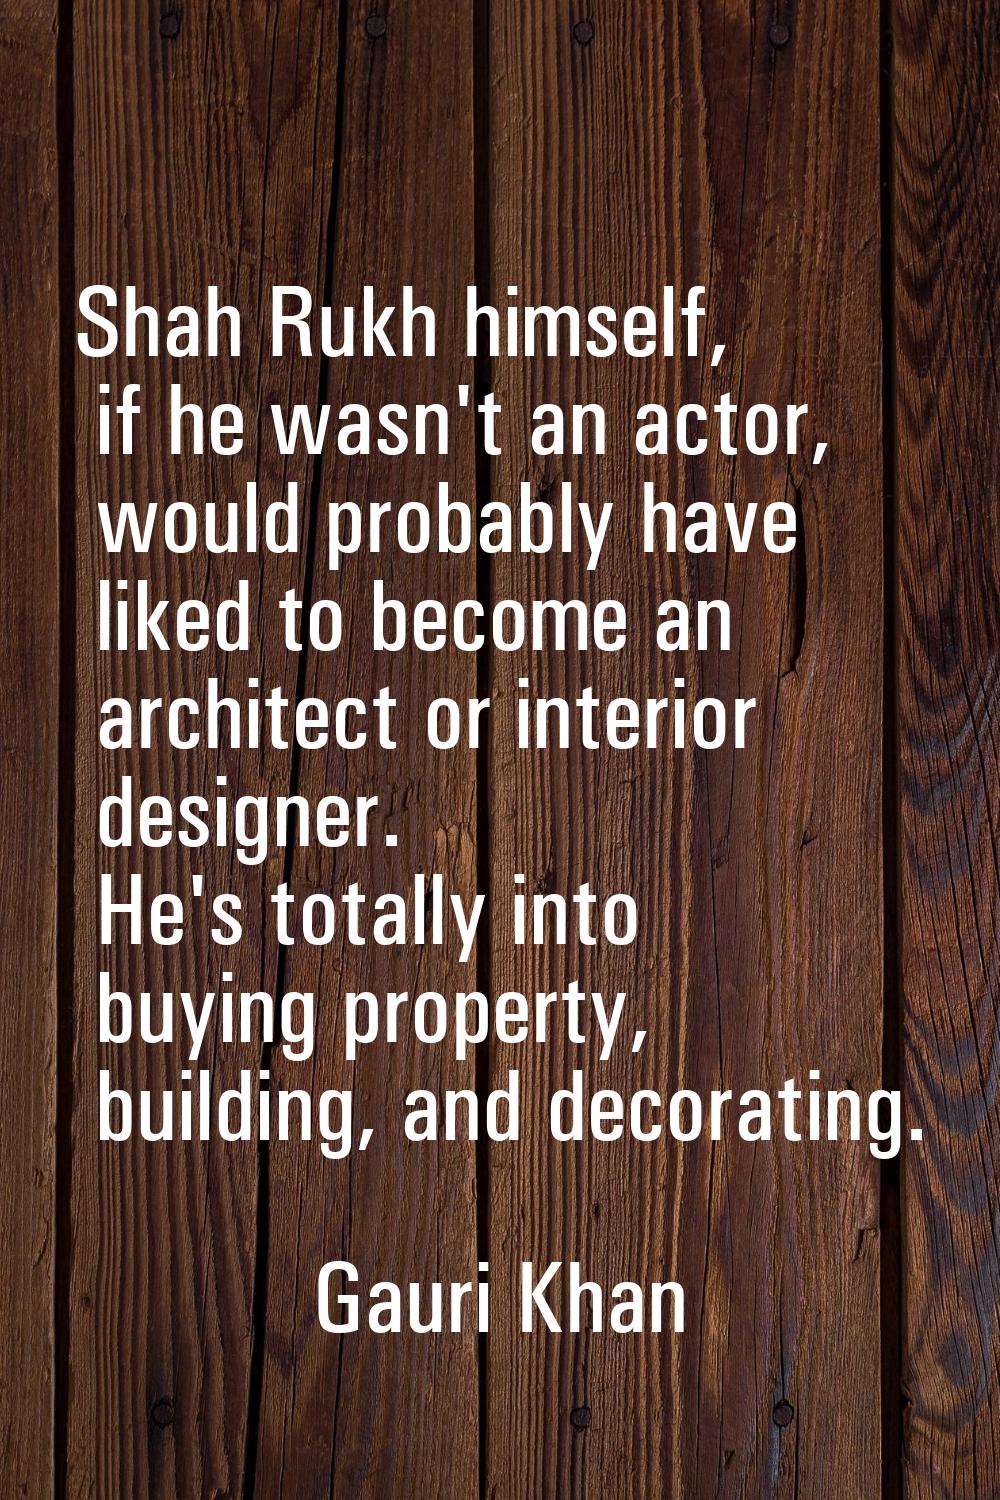 Shah Rukh himself, if he wasn't an actor, would probably have liked to become an architect or inter